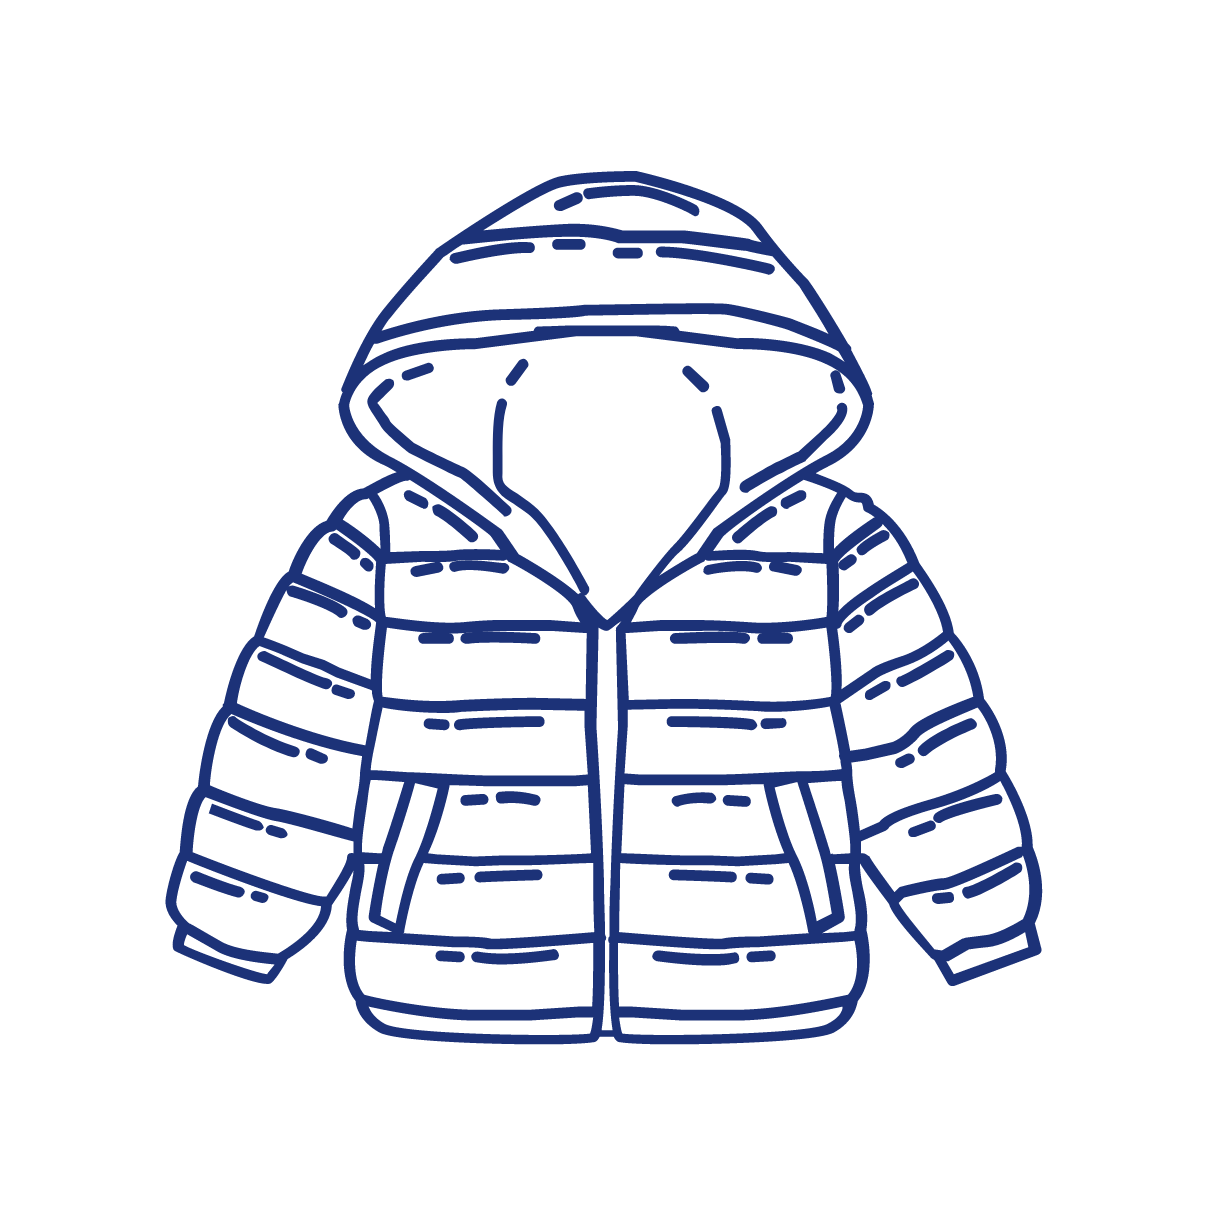 blue graphic illustration of a child's hooded down jacket